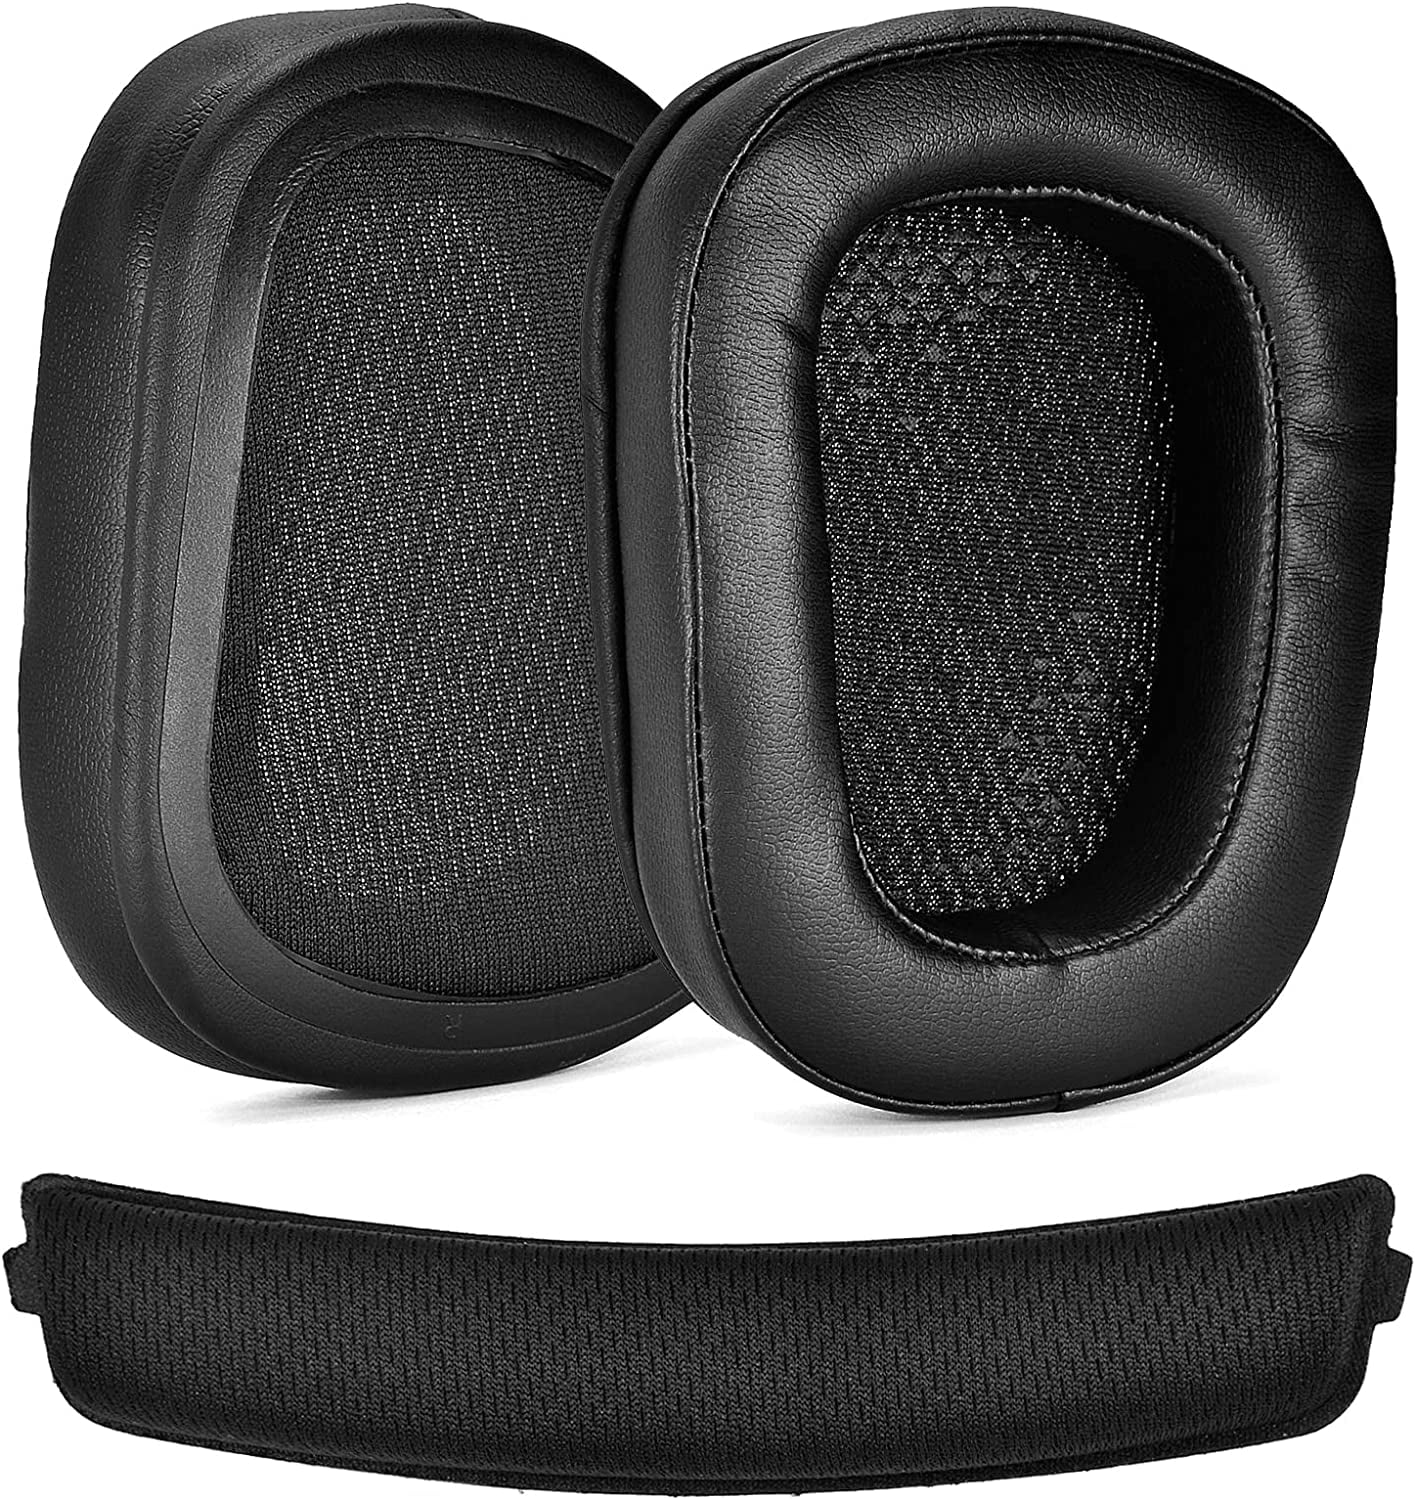 G933 G935 Ear Replacement Ear Cushion Earpads and Head Compatible with G933 G935 / g - Walmart.com